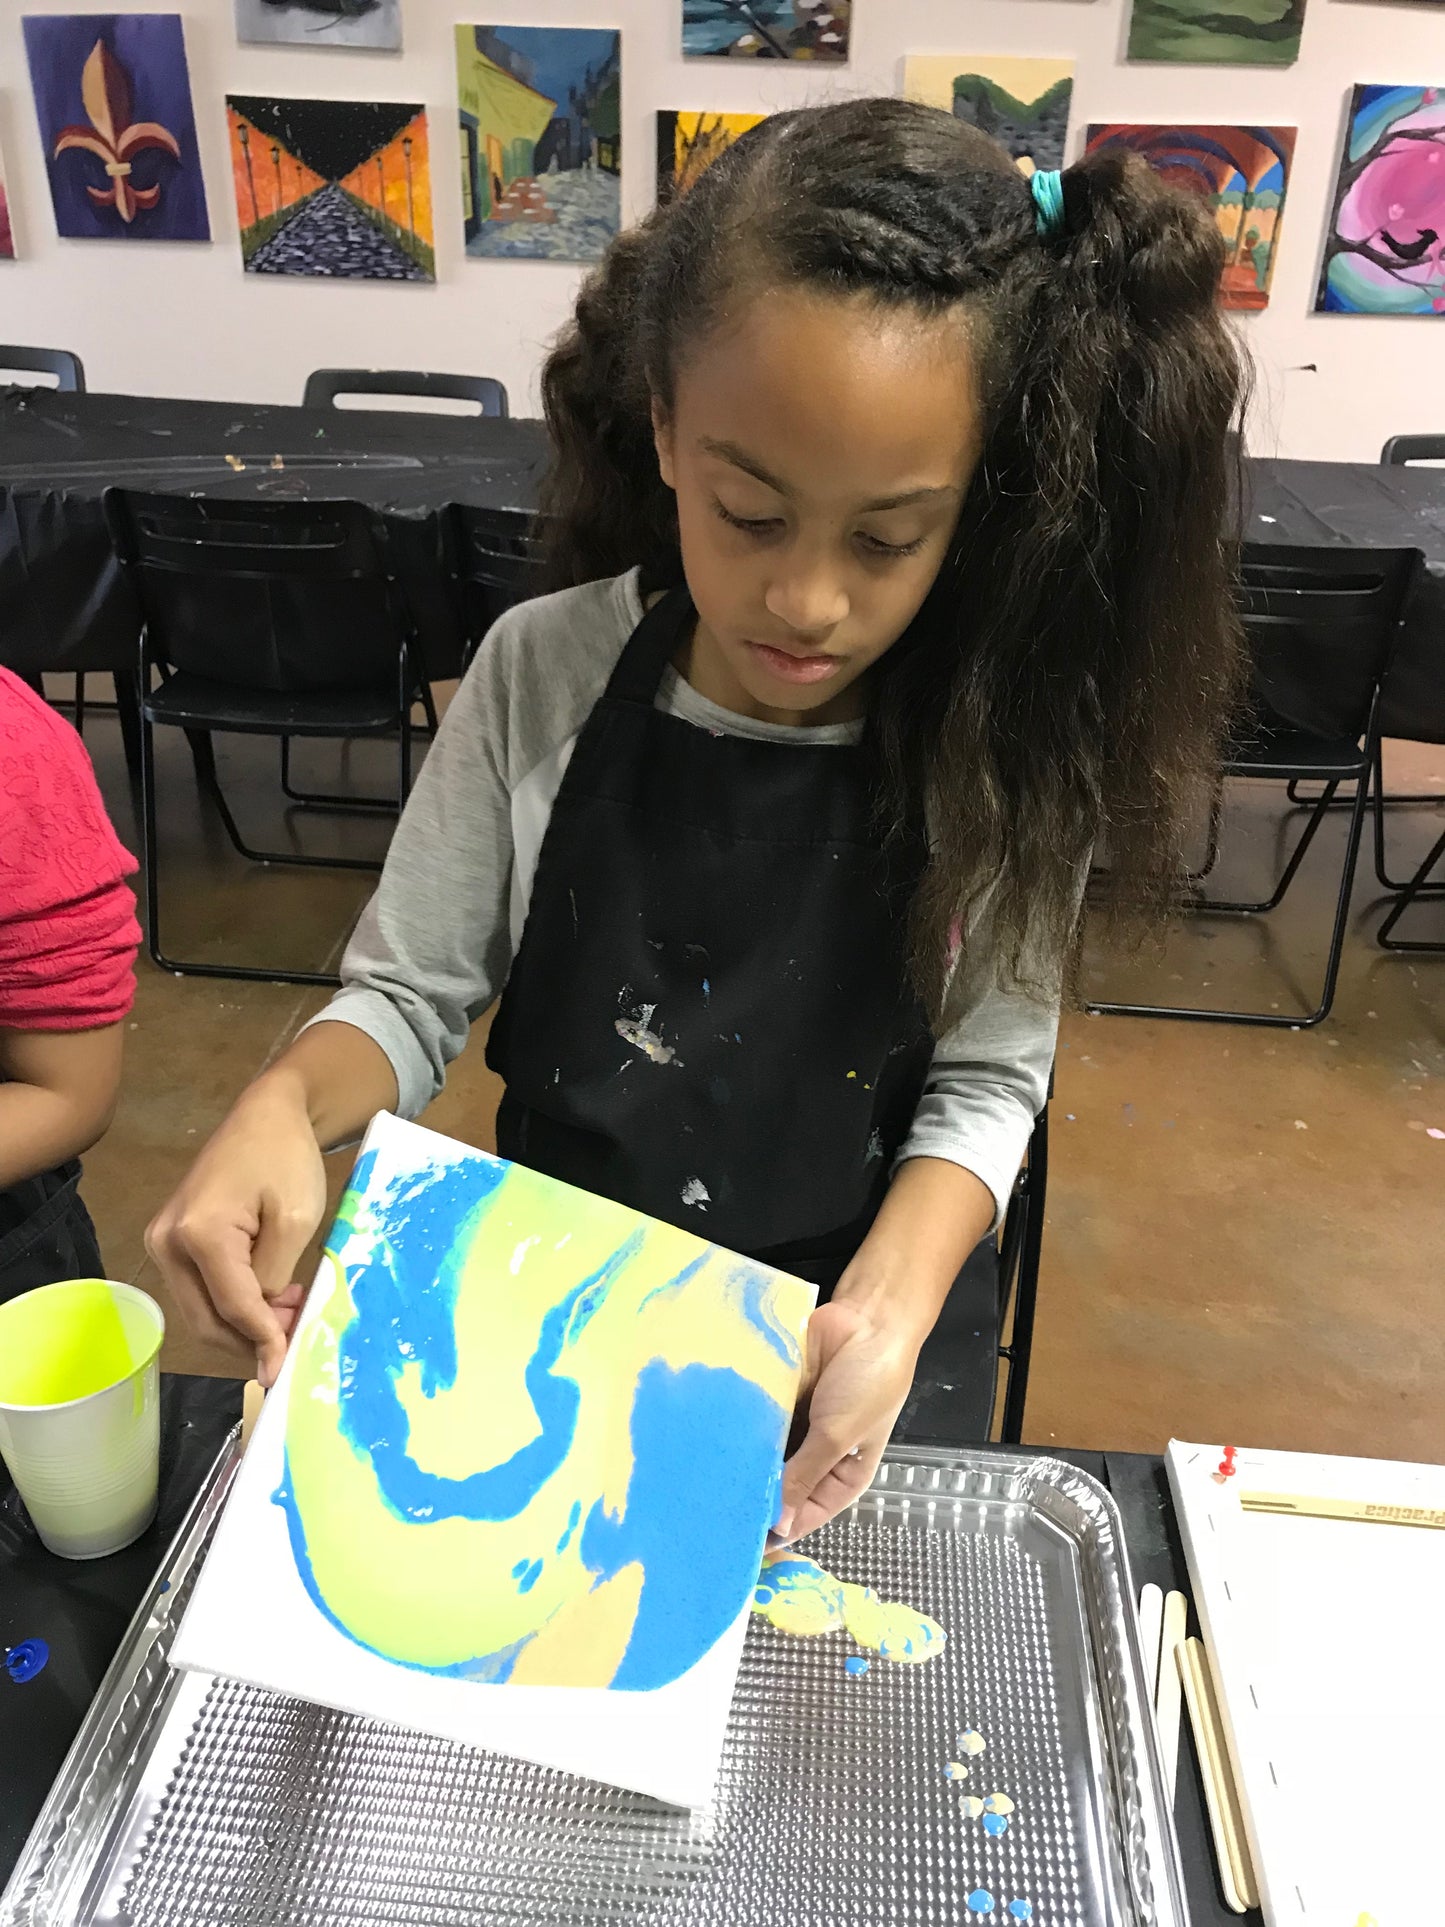 Wed, Oct 25th, 4-6p “Acrylic Poured” Houston Public Kids Painting Class